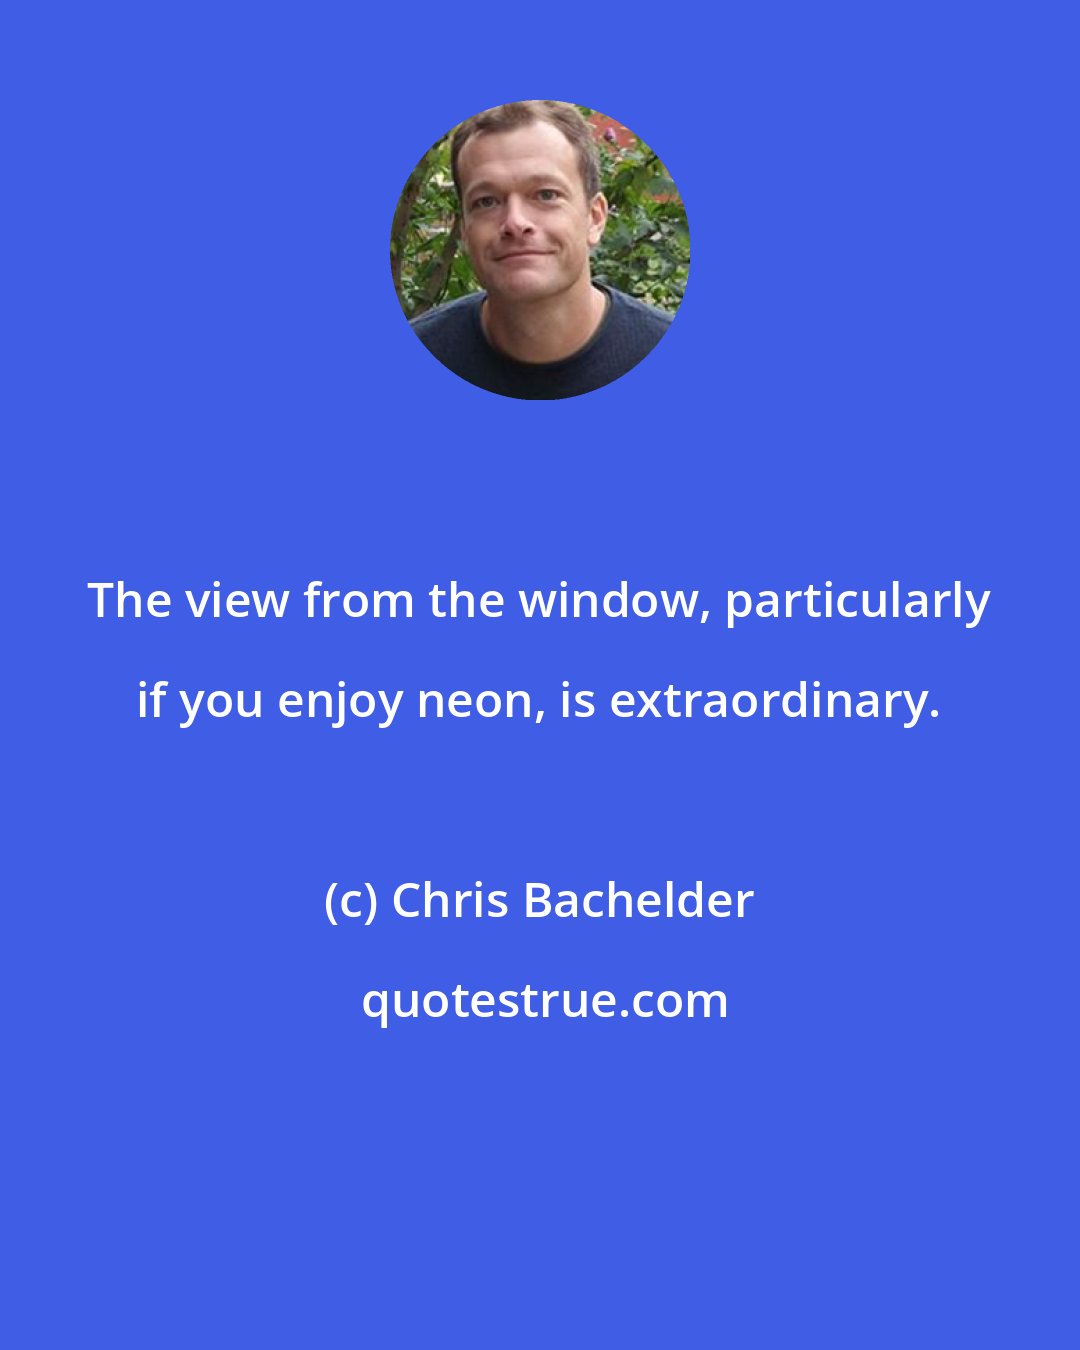 Chris Bachelder: The view from the window, particularly if you enjoy neon, is extraordinary.